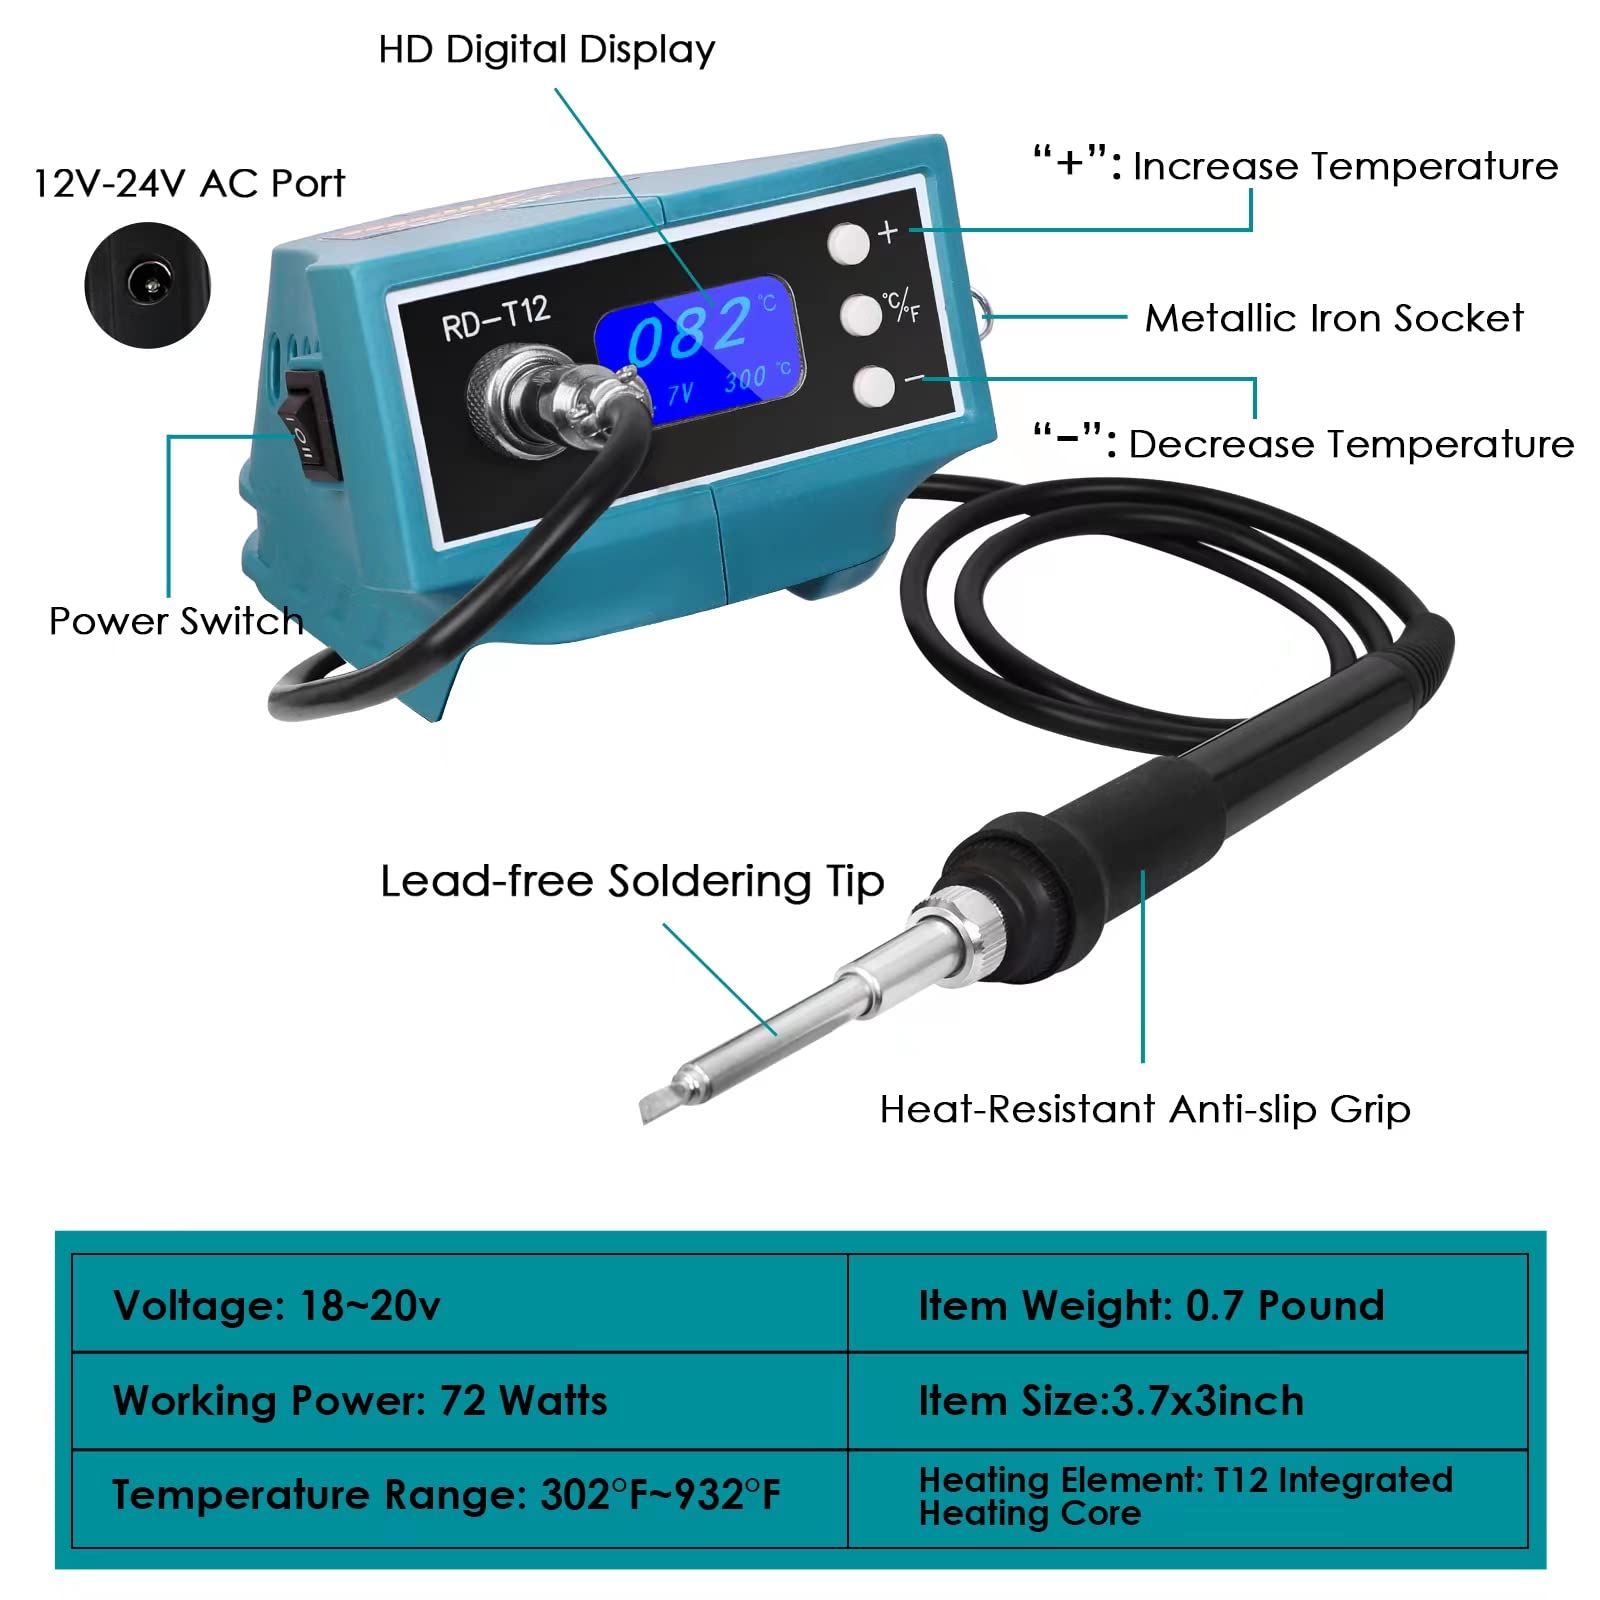 Cordless Soldering Iron Station for Makita 18V Max Battery (Battery NOT Included) with Digital Display, Auto-Sleep, °C/°F Conversion, Welding Tool for DIY, Appliance Repair, Watch Repair, Wire Welding